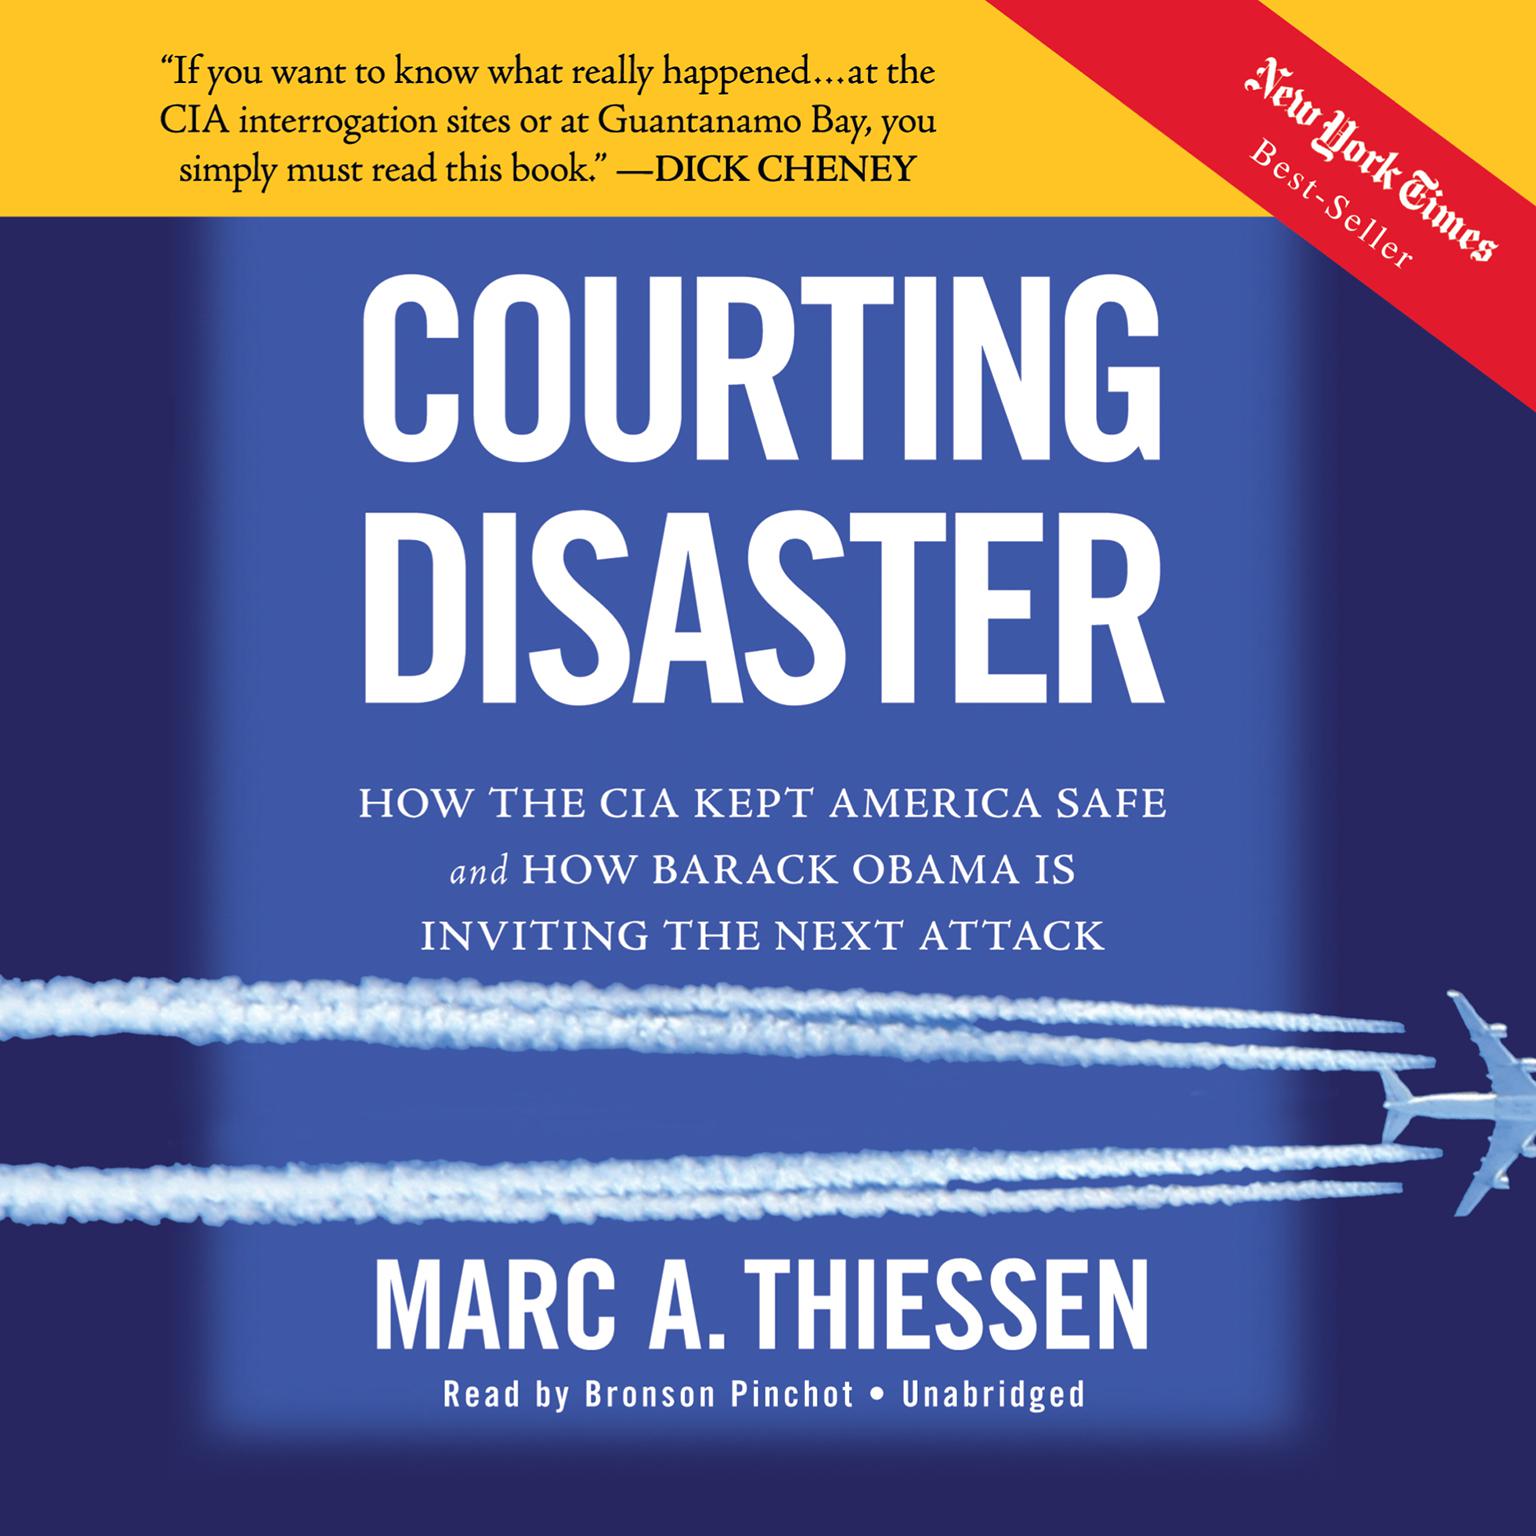 Courting Disaster: How the CIA Kept America Safe and How Barack Obama Is Inviting the Next Attack Audiobook, by Marc A. Thiessen